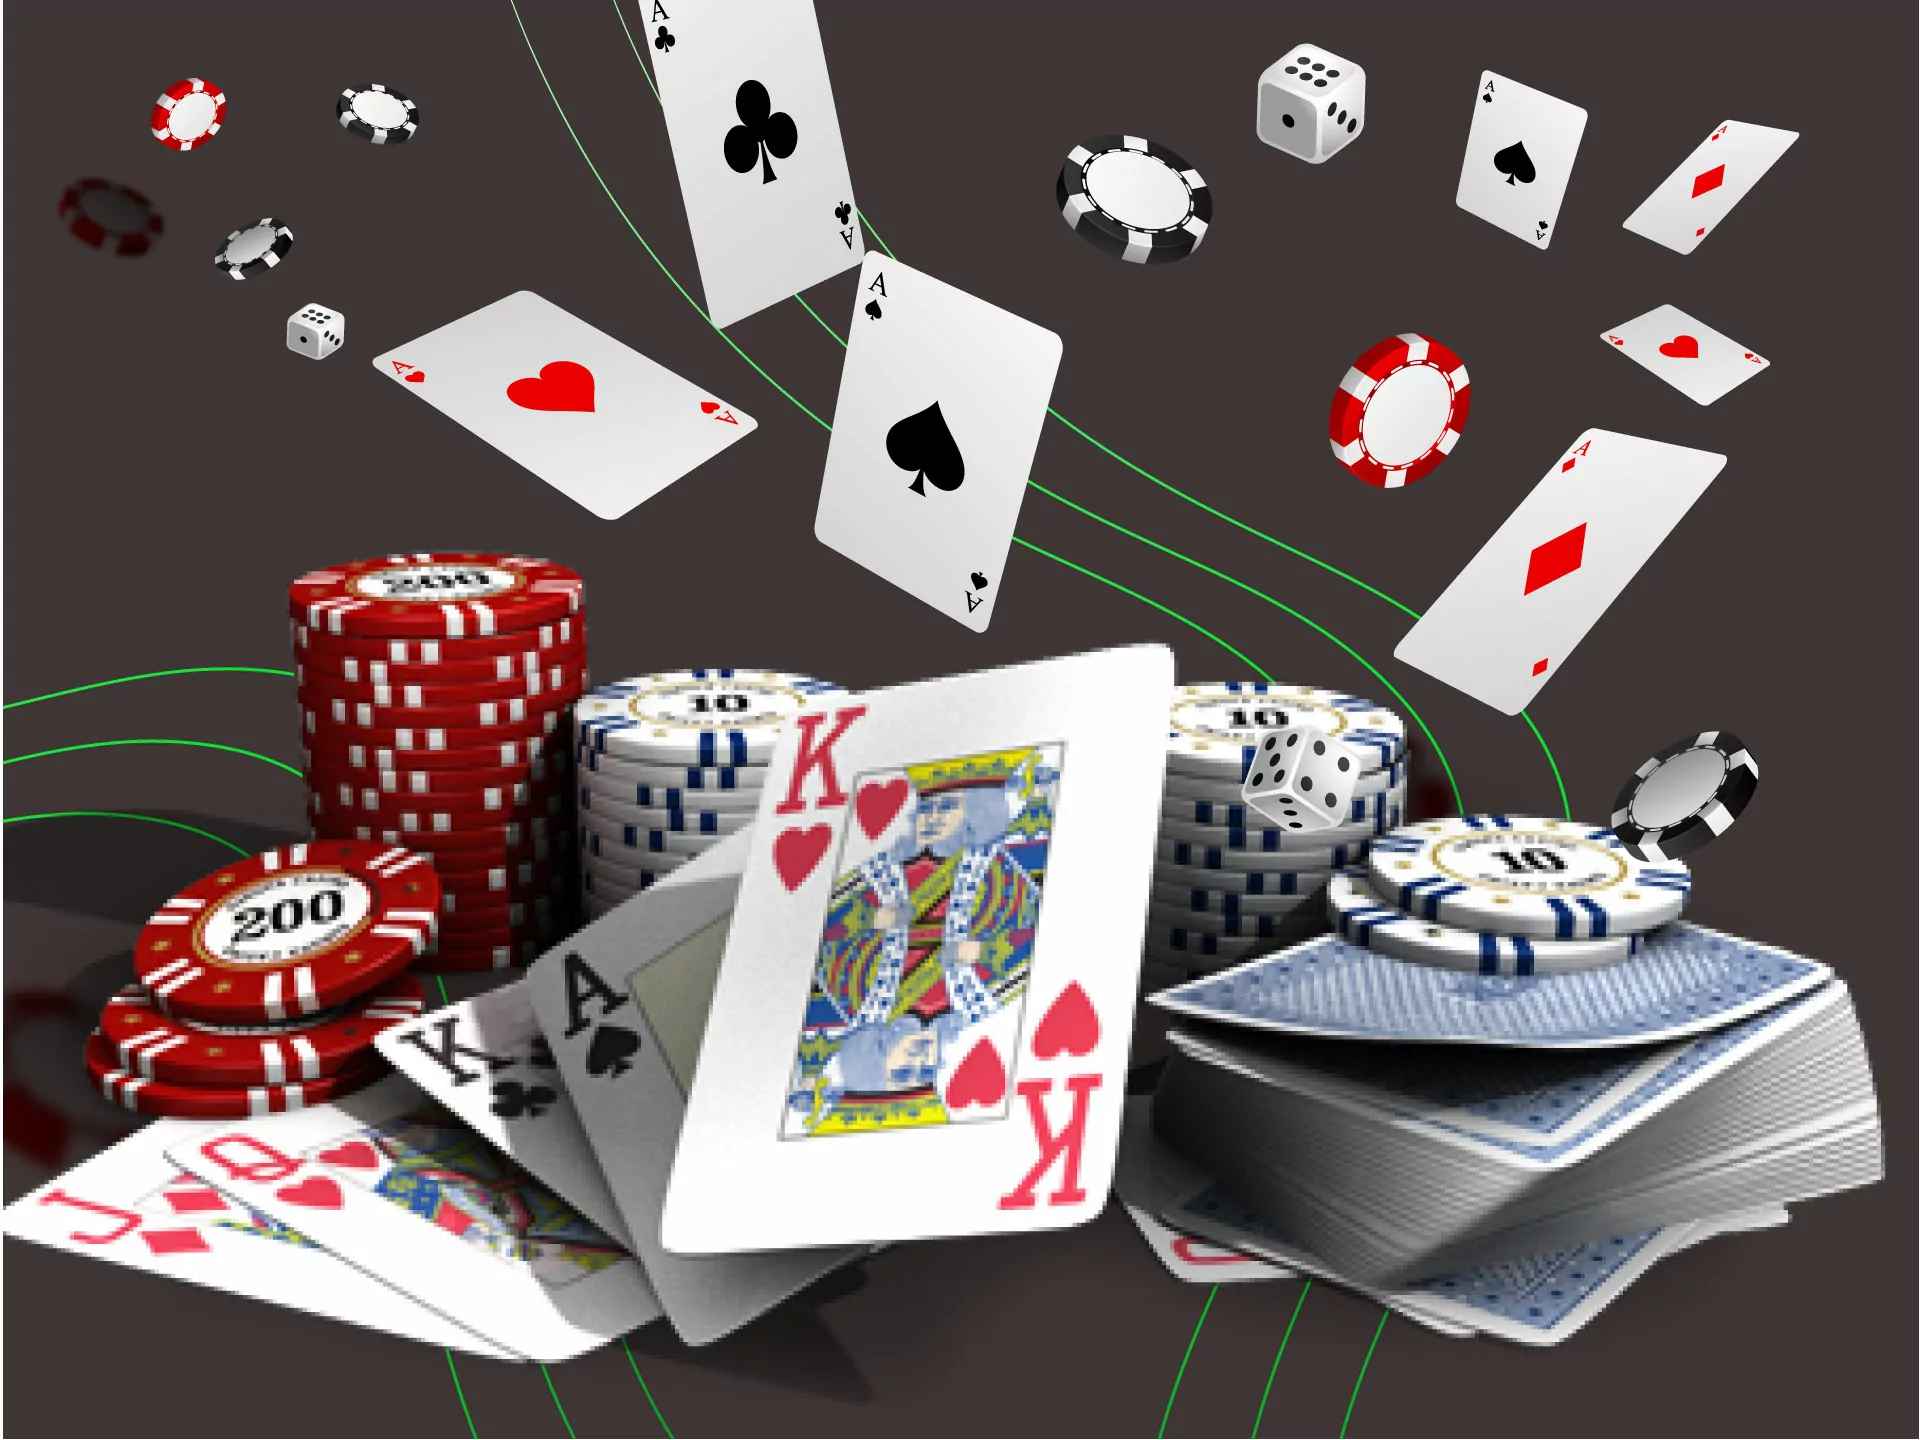 Freeroll is a chance to win money without depositing yours.